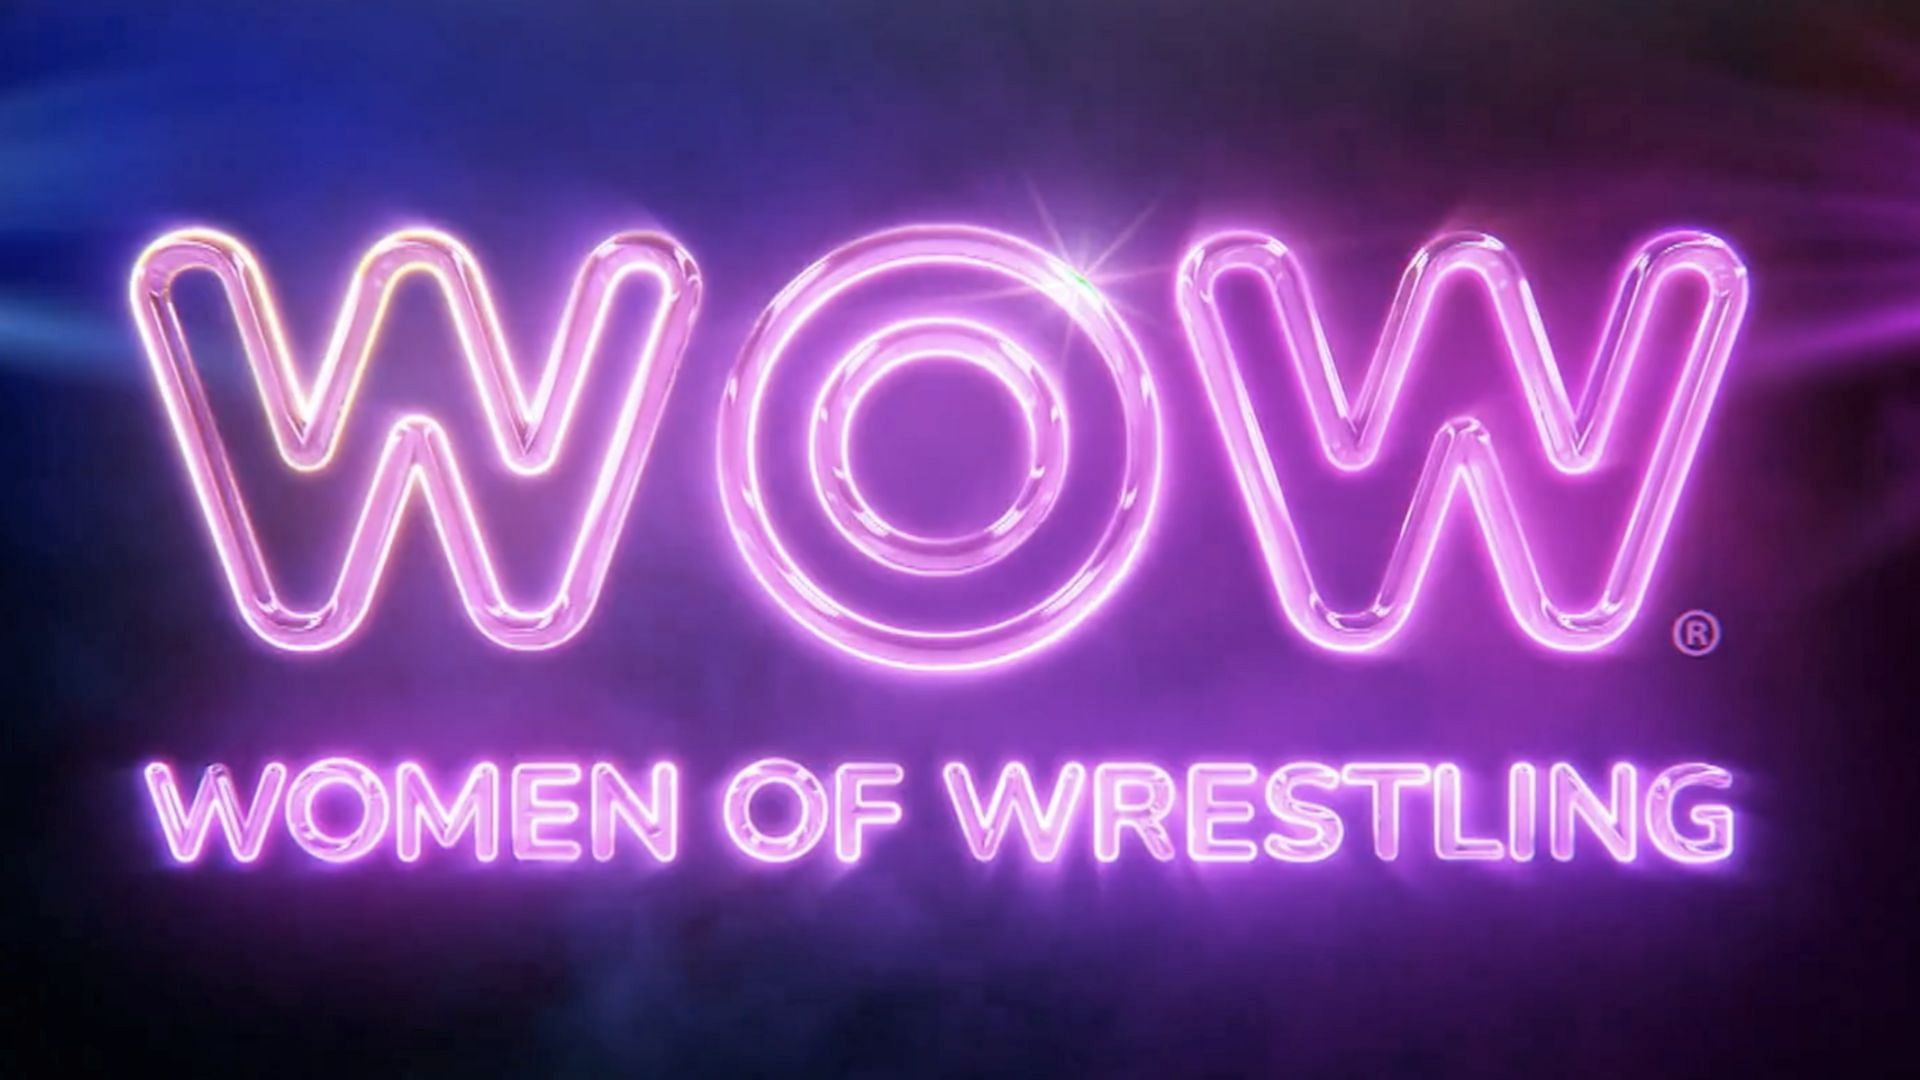 A WWE Hall of Famer reportedly rejected WOW Wrestling